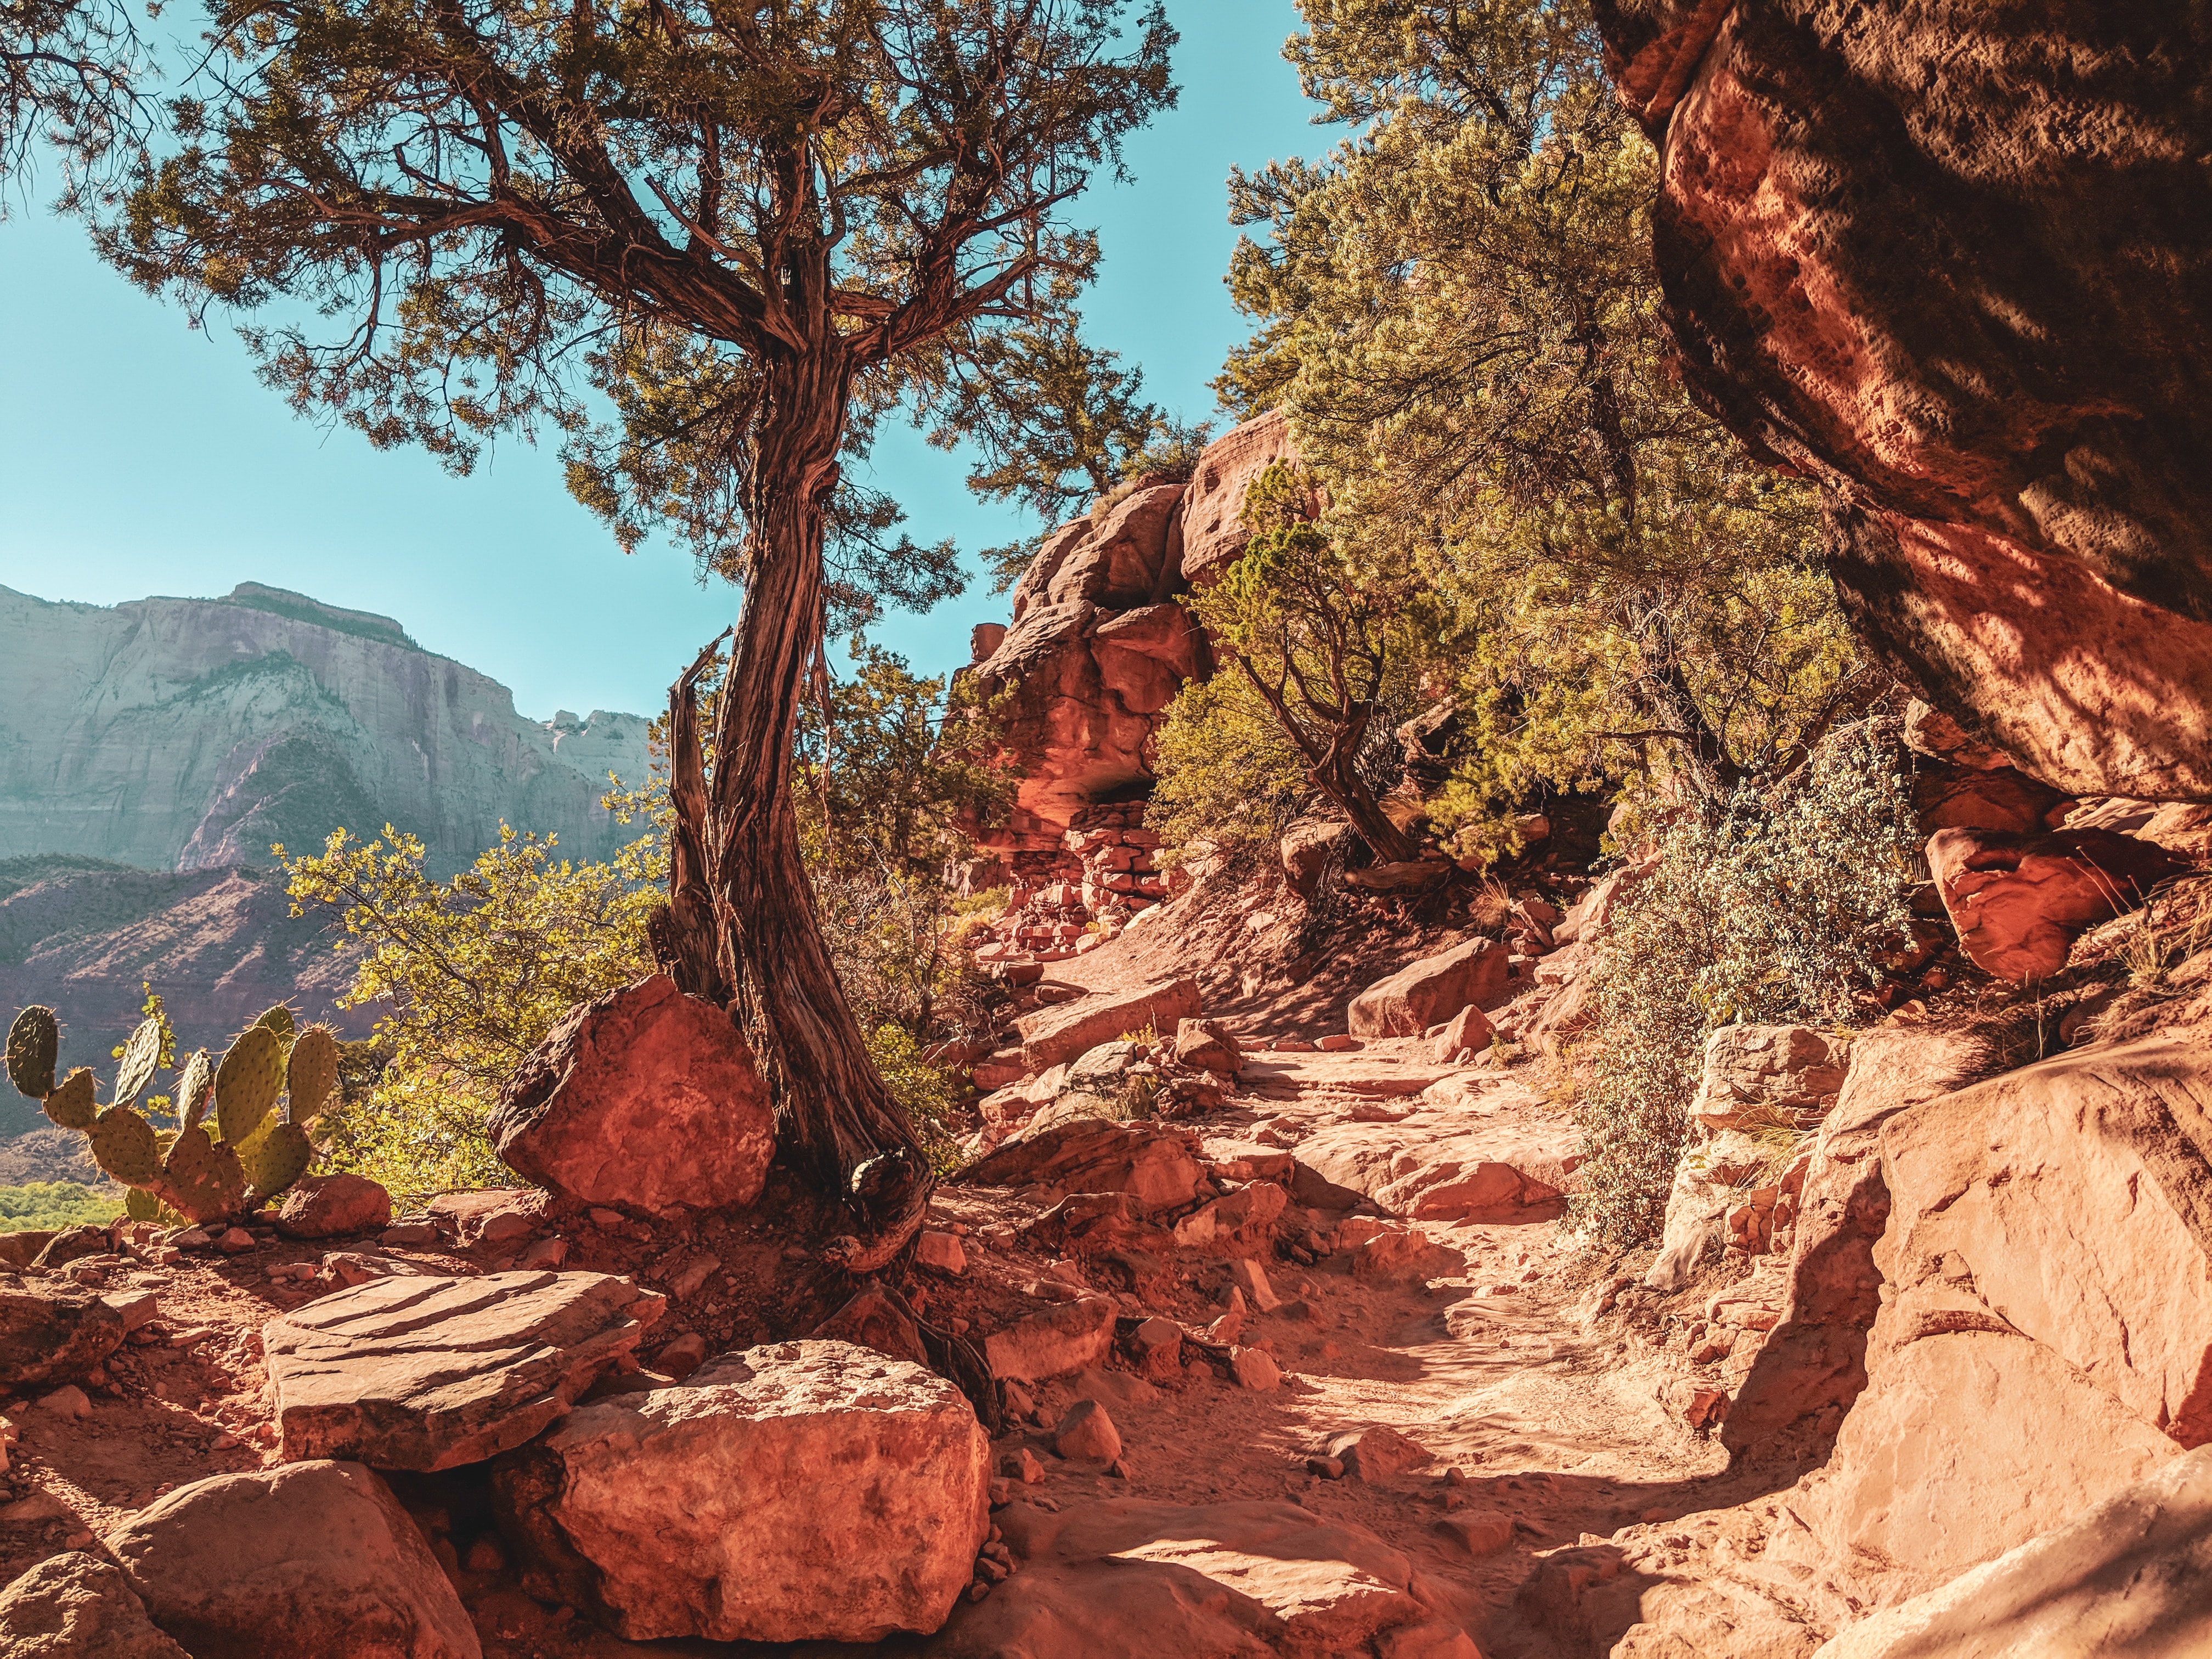 The hike trail at Zion National Park